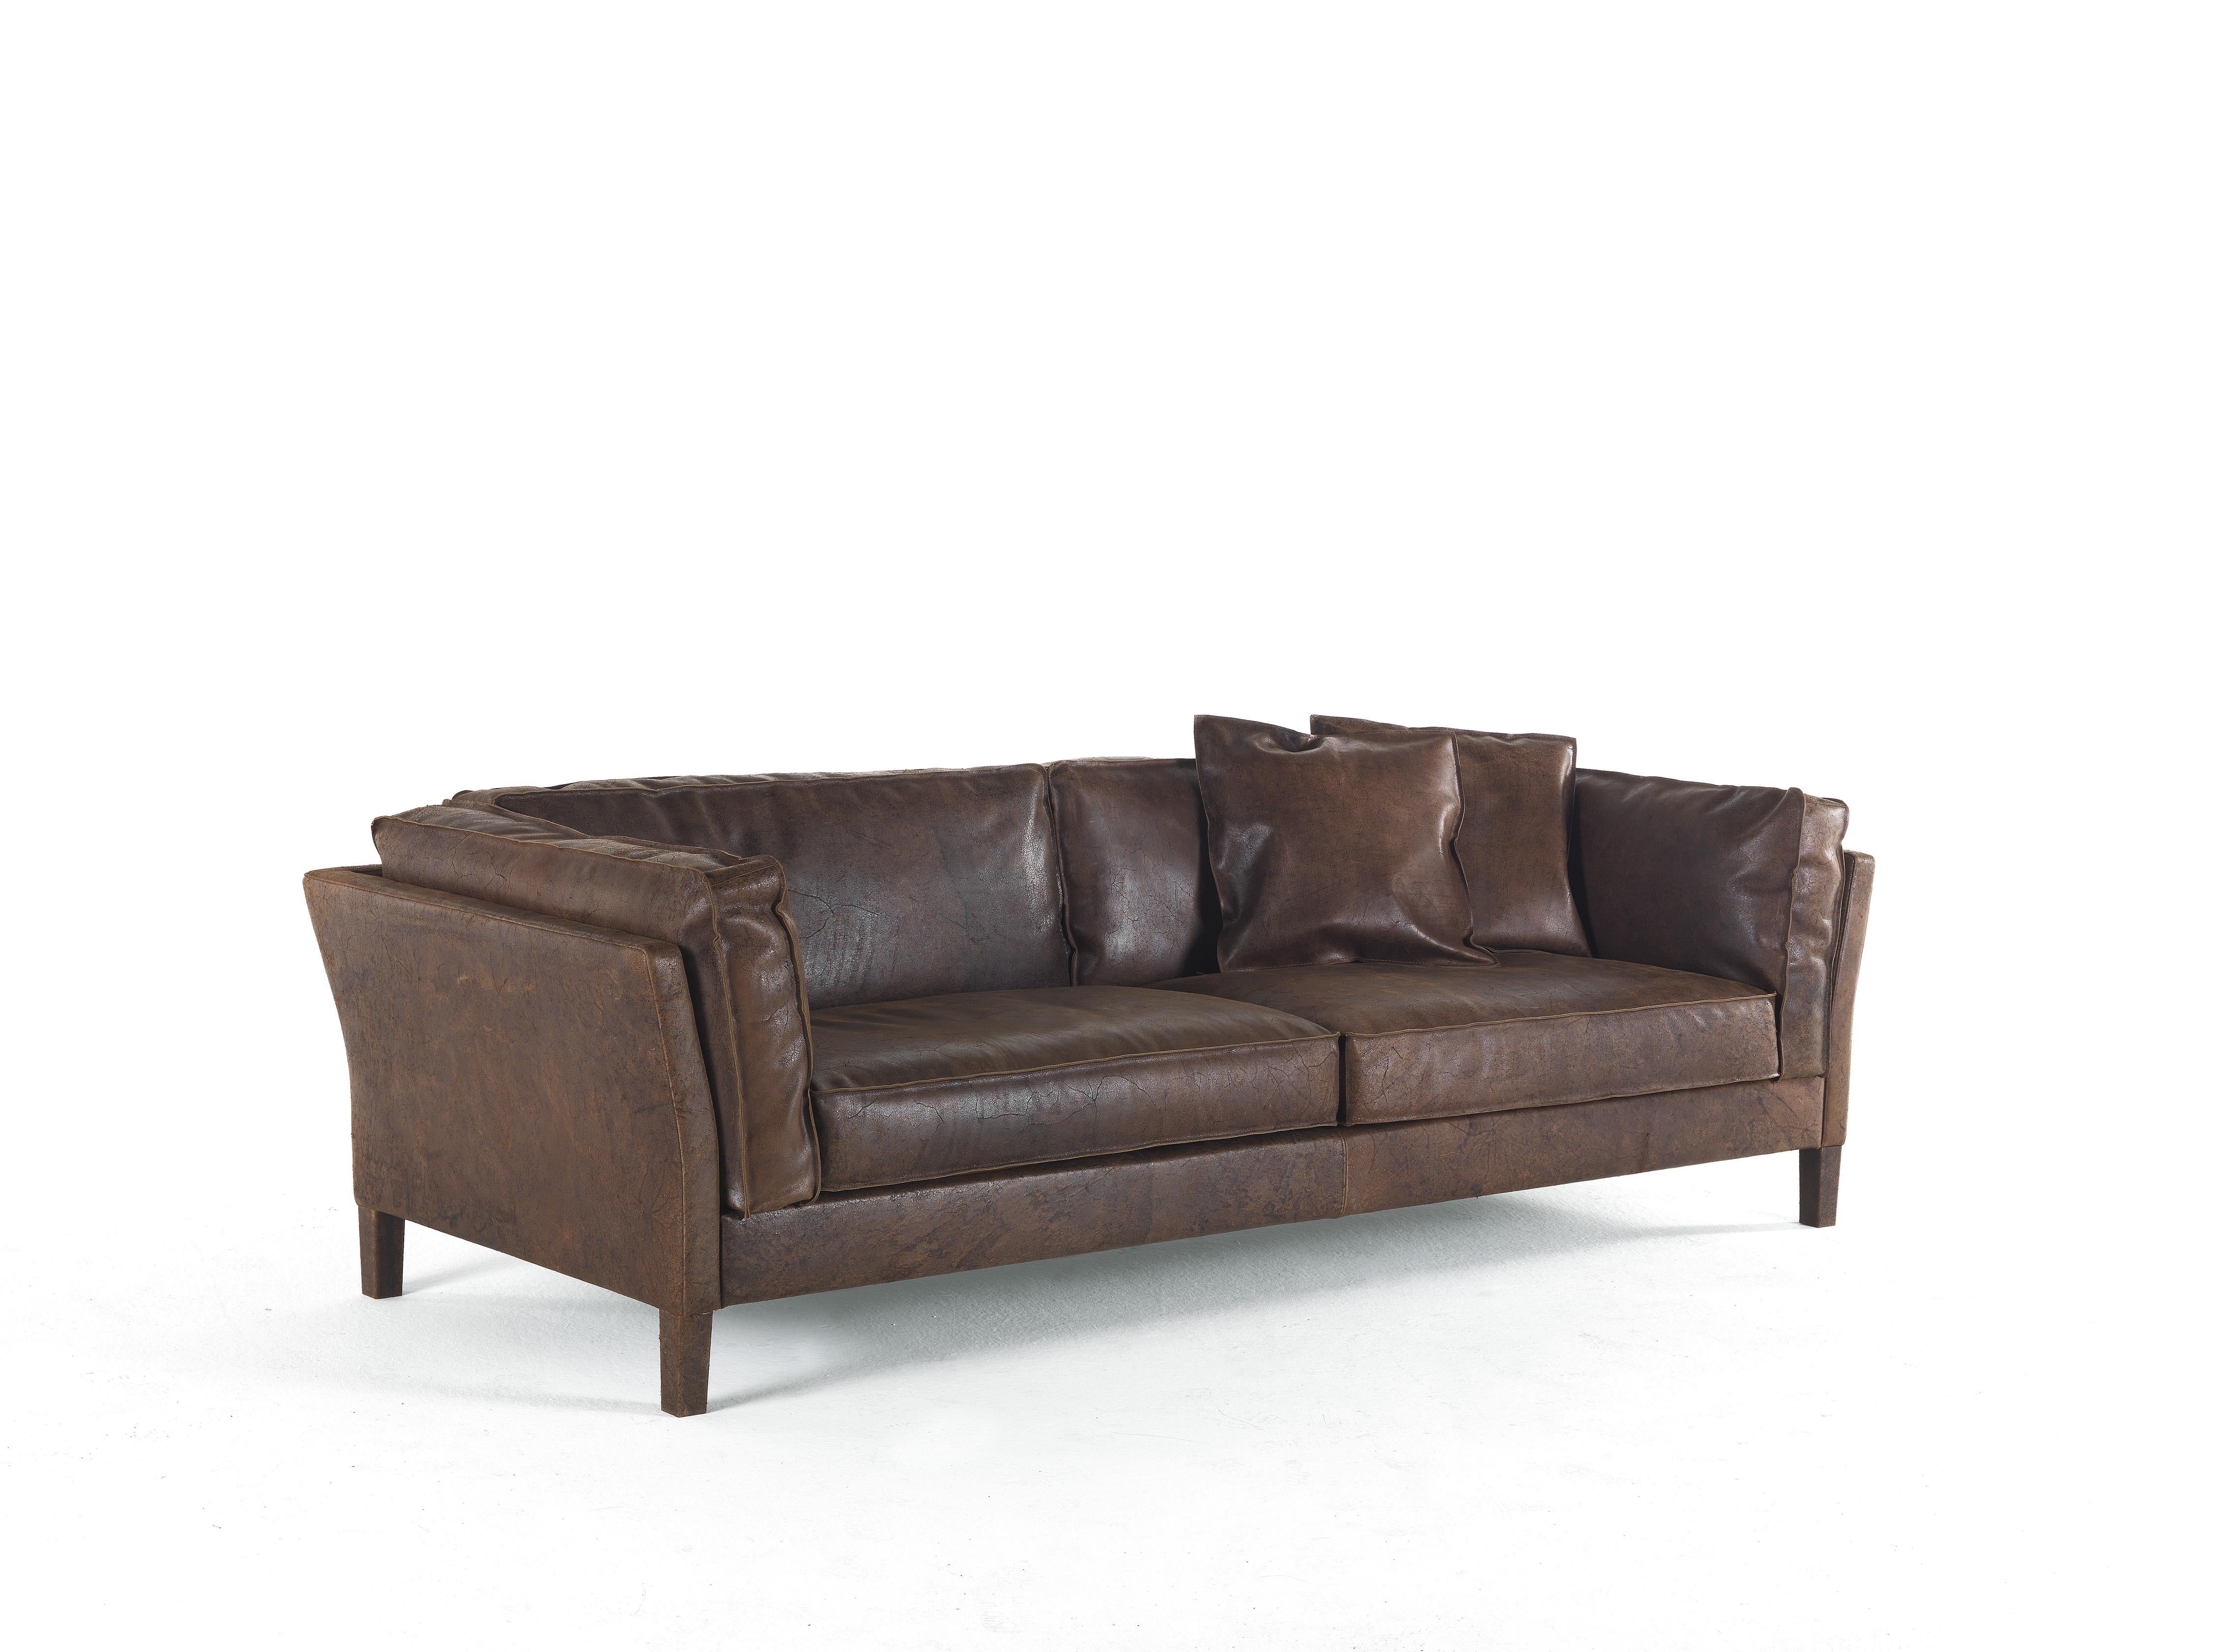 Loft 3-seater sofa with structure in beech wood and foam. Upholstery in leather cat. B Grunge L.13.01 Antique Dark Brown. Feet in solid beech wood dyed Smokey Grey. Decorative cushion set not included.